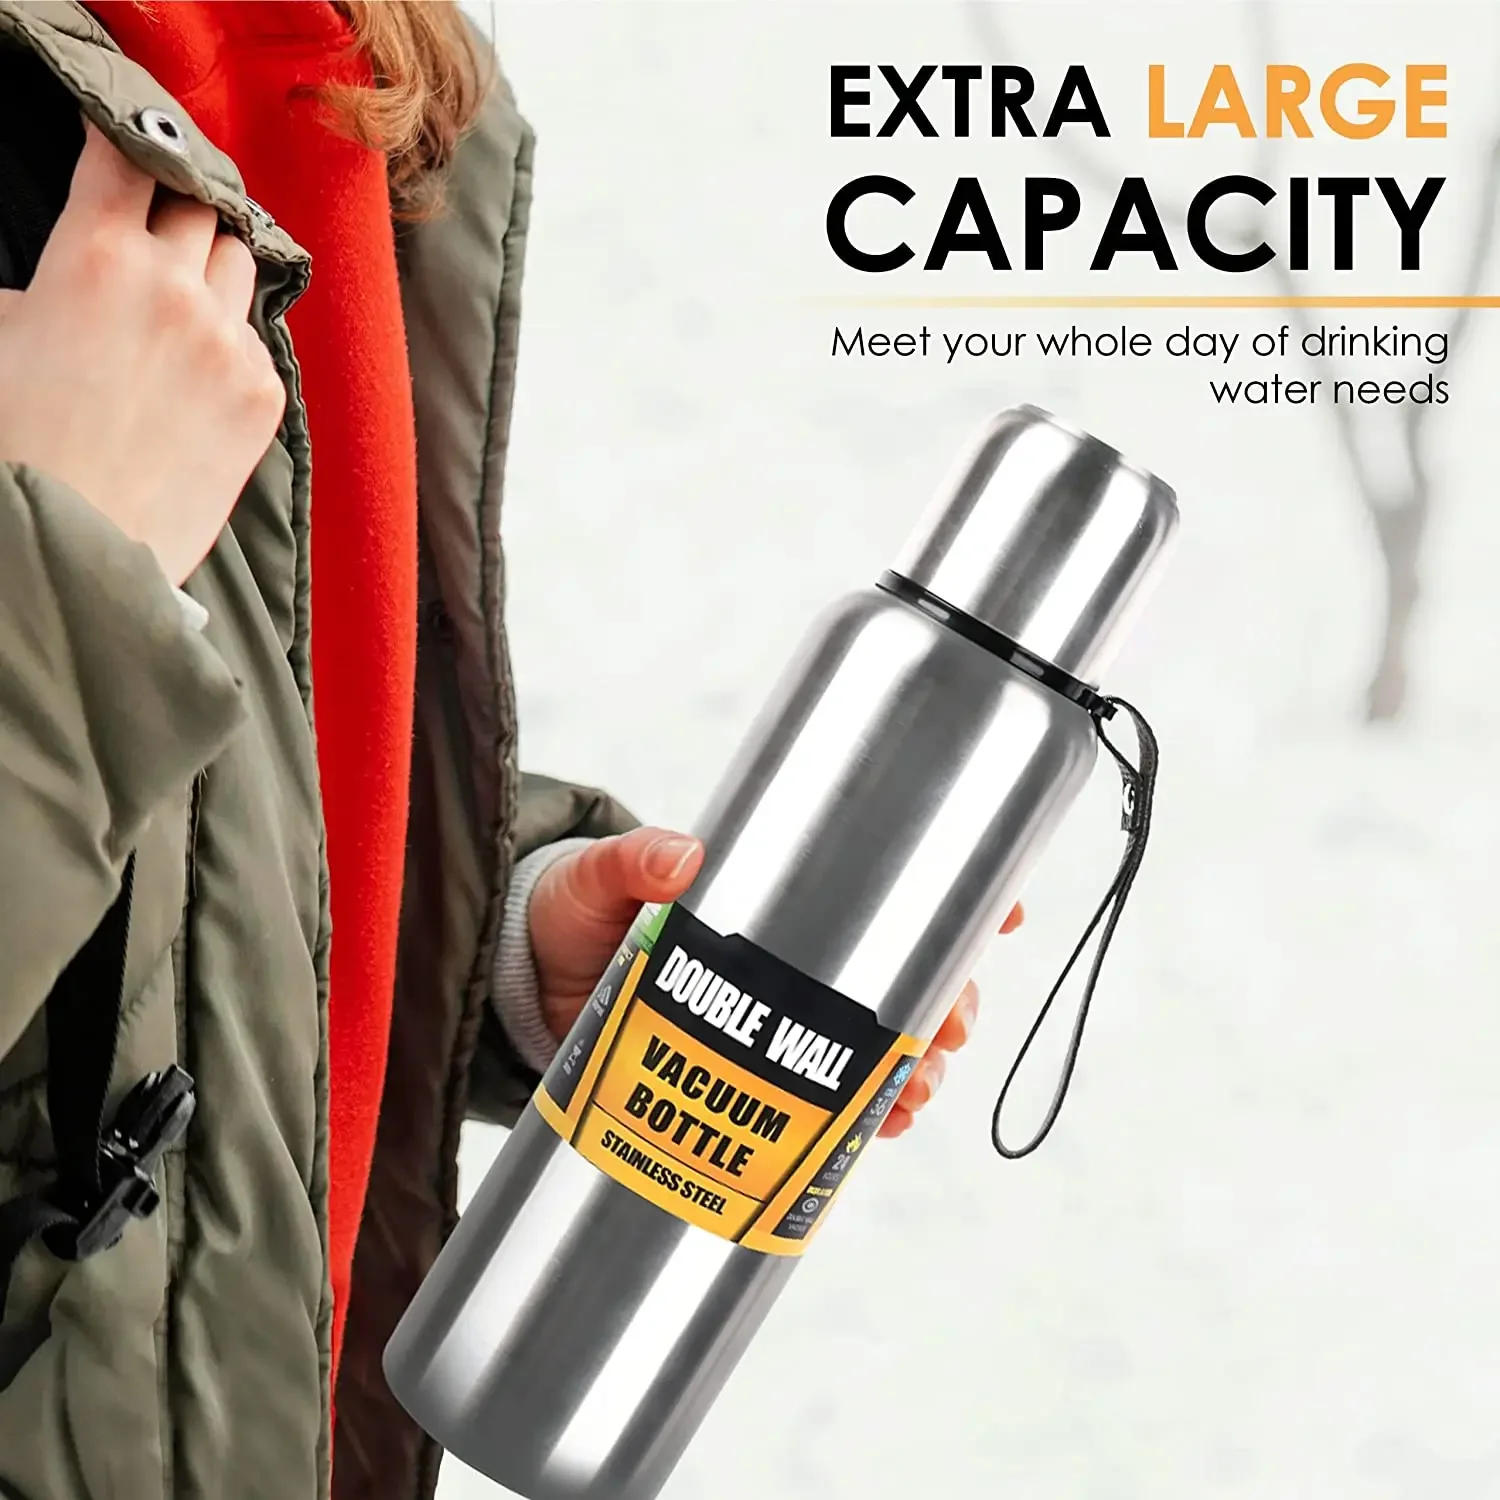 https://ae01.alicdn.com/kf/S5f67d3d3f0c94732a44eb1b8927ab58dy/1500ml-Water-Bottle-Stainless-Steel-Cold-Hydroflask-Thermos-Large-Capacity-Thermal-Mug-Cup-Sport-Cycling-Vacuum.jpg